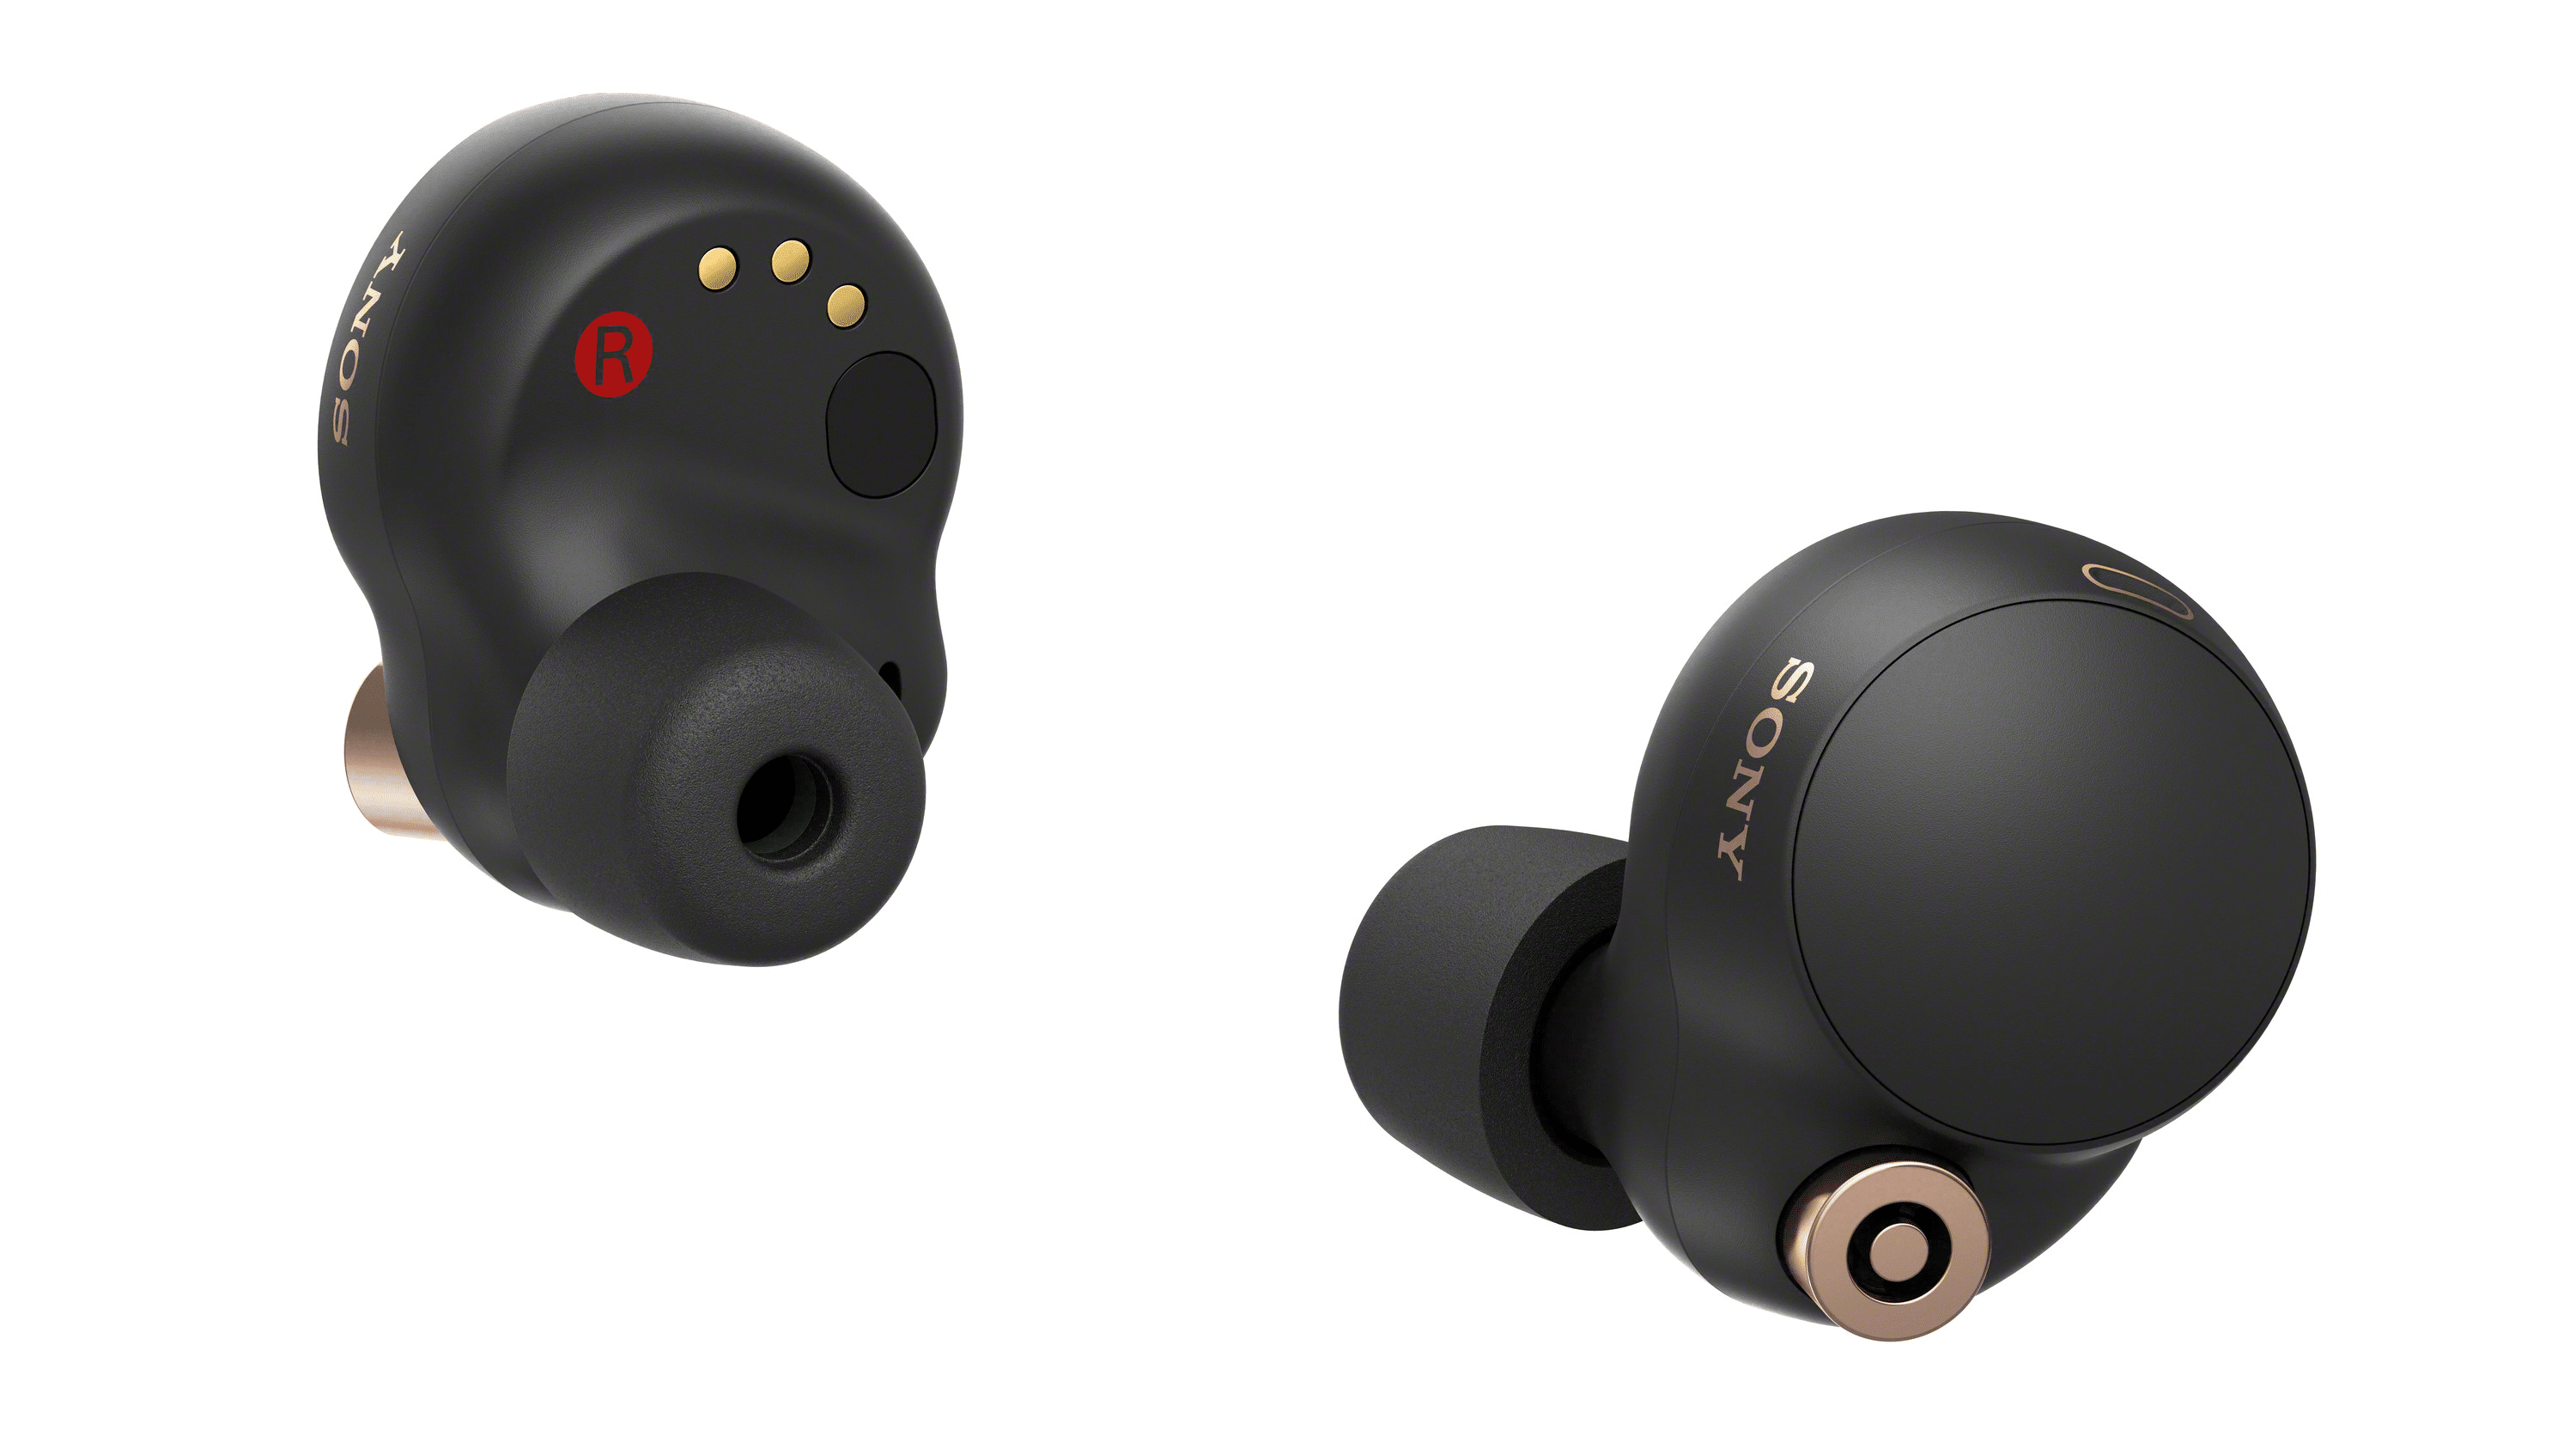 2023 Sony is finally adding multipoint to its earbuds and context 